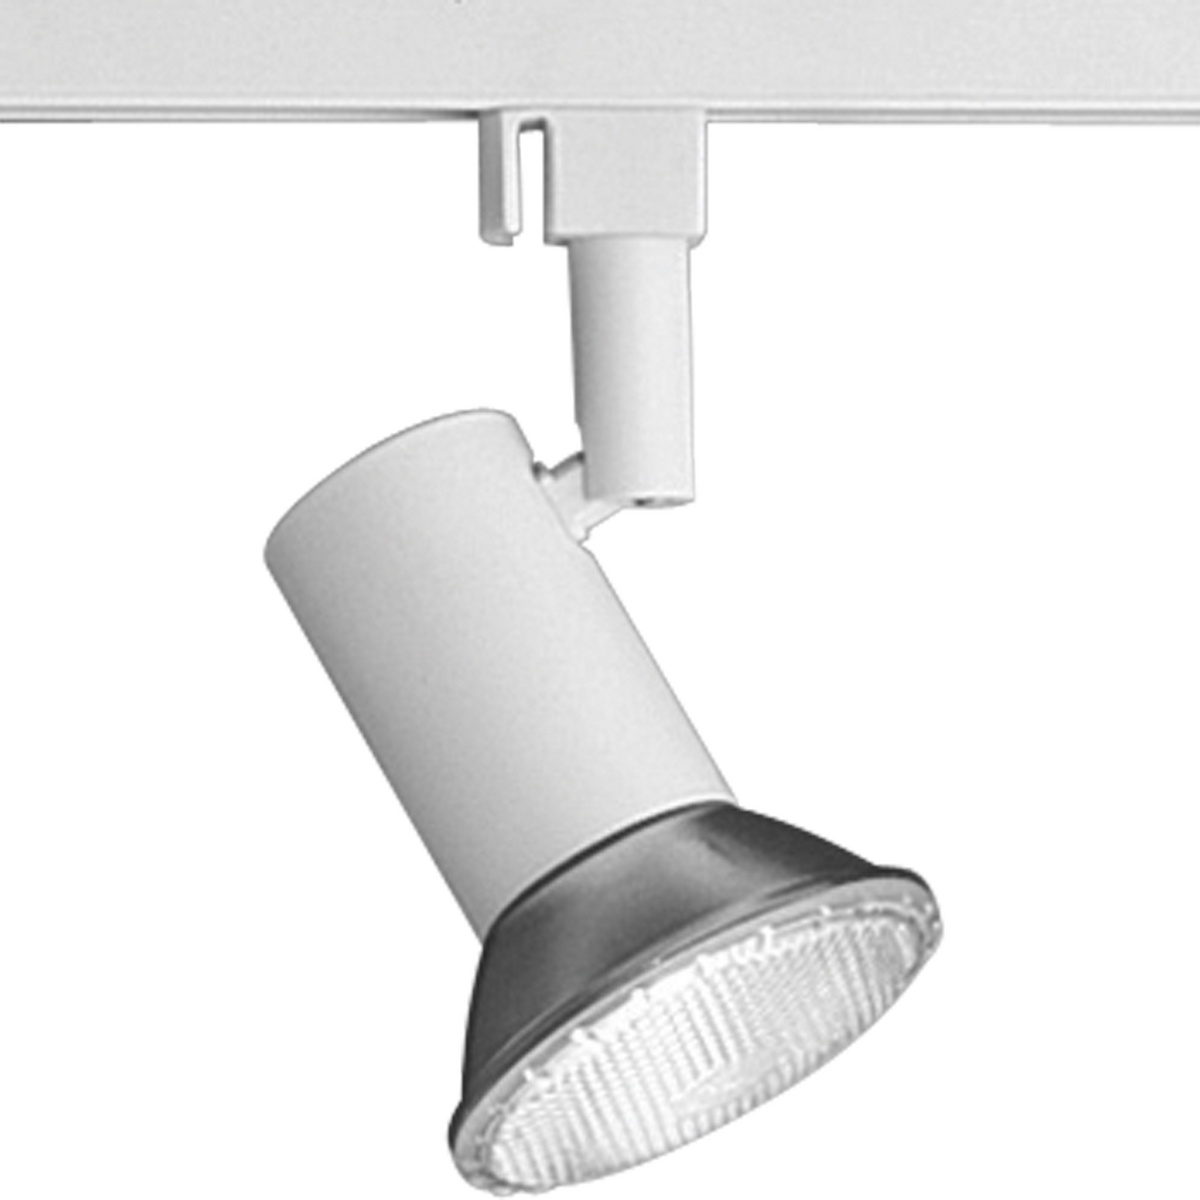 Simple design of this Alpha Trak head provides minimal obtrusion into the visual space. Lampholder rotates 360 horizontally and 90 degree vertically. Heads can be easily repositioned on the track to provide lighting in different areas of the room. Universal track head accepts any medium base PAR, BR, or R lamp except PAR30 short neck. White finish.